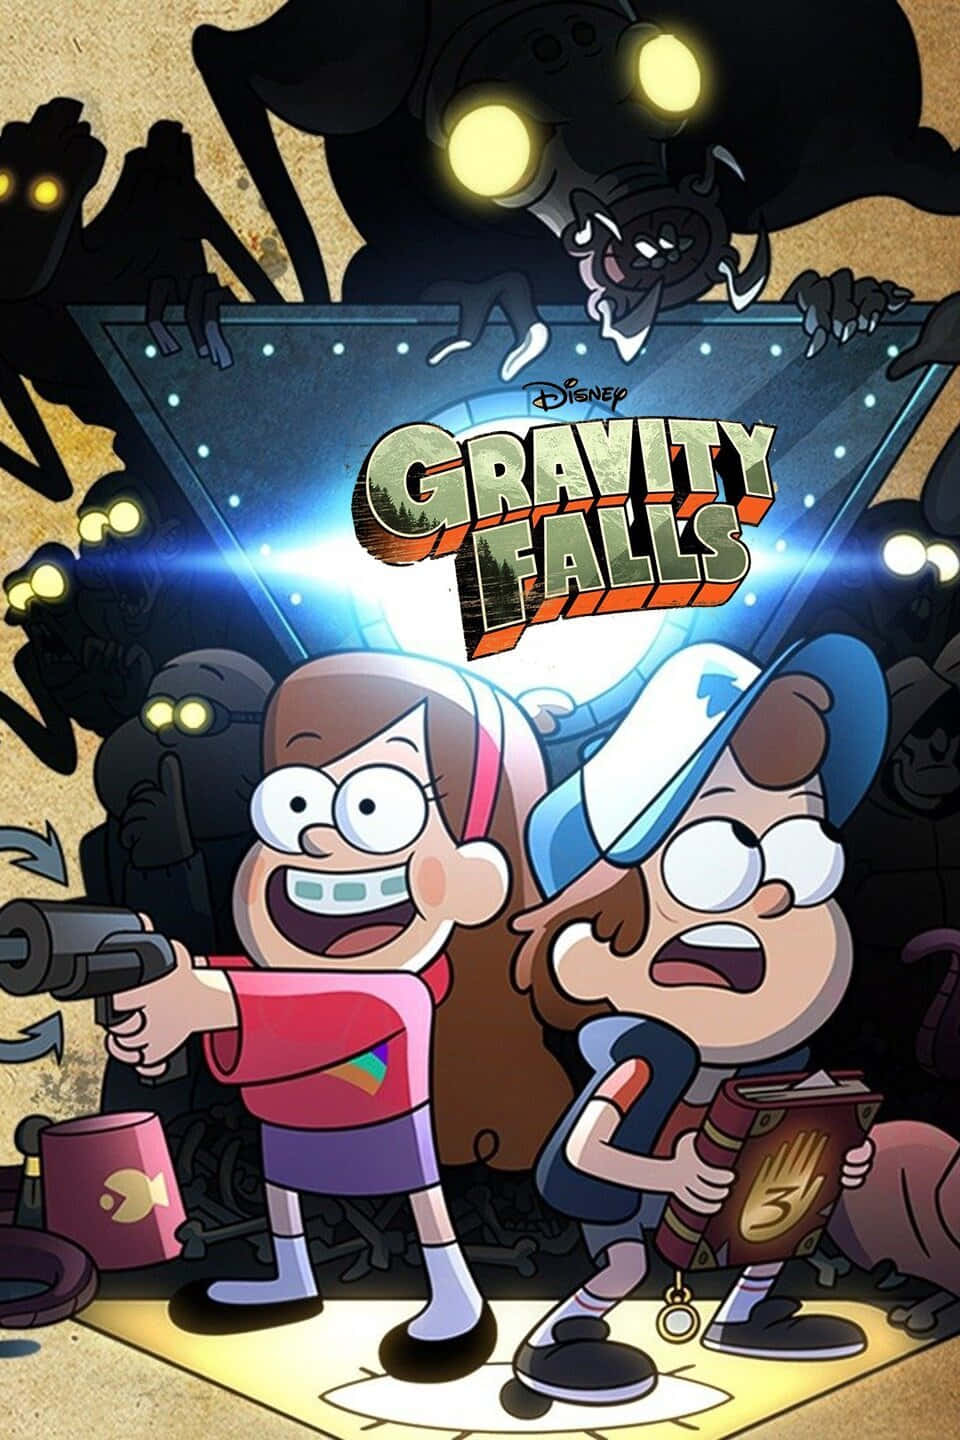 "Exploring with Dipper and Mabel in Gravity Falls"